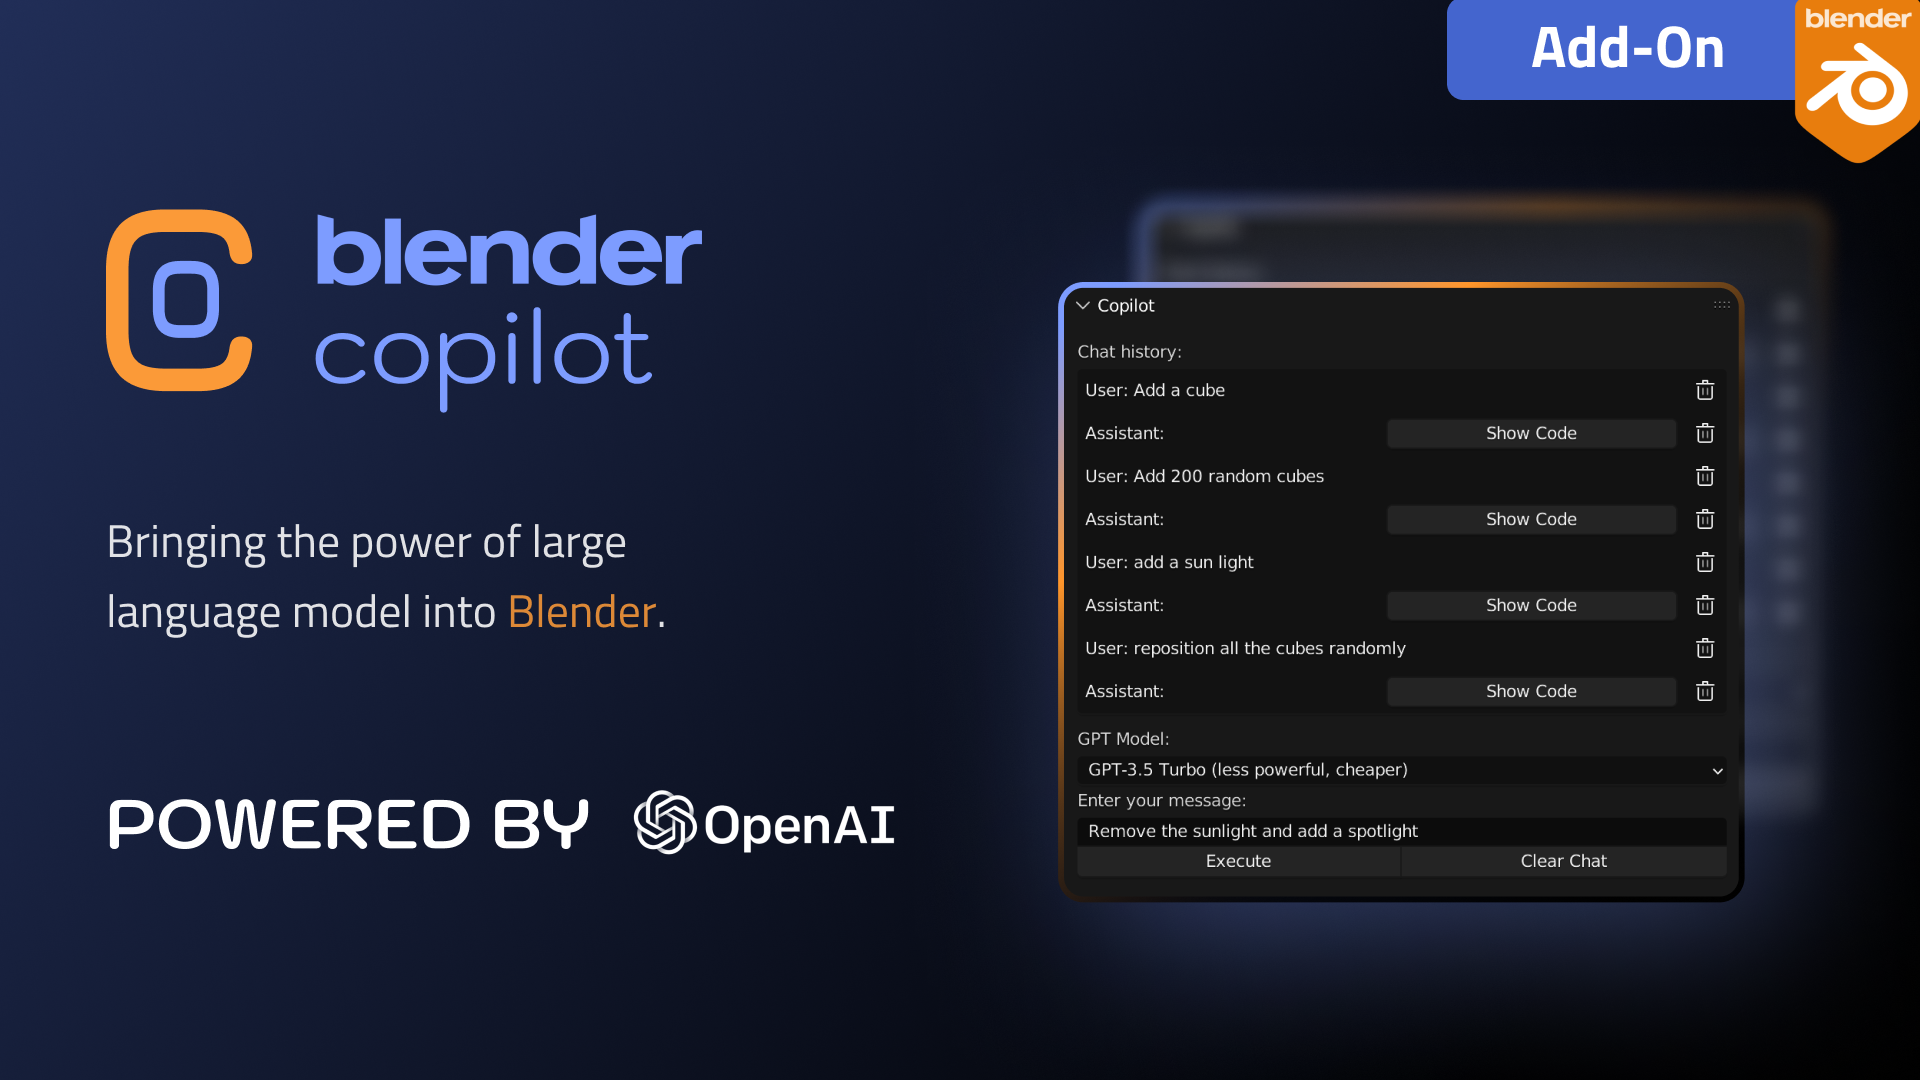  Blender Copilot is an AI-powered add-on that